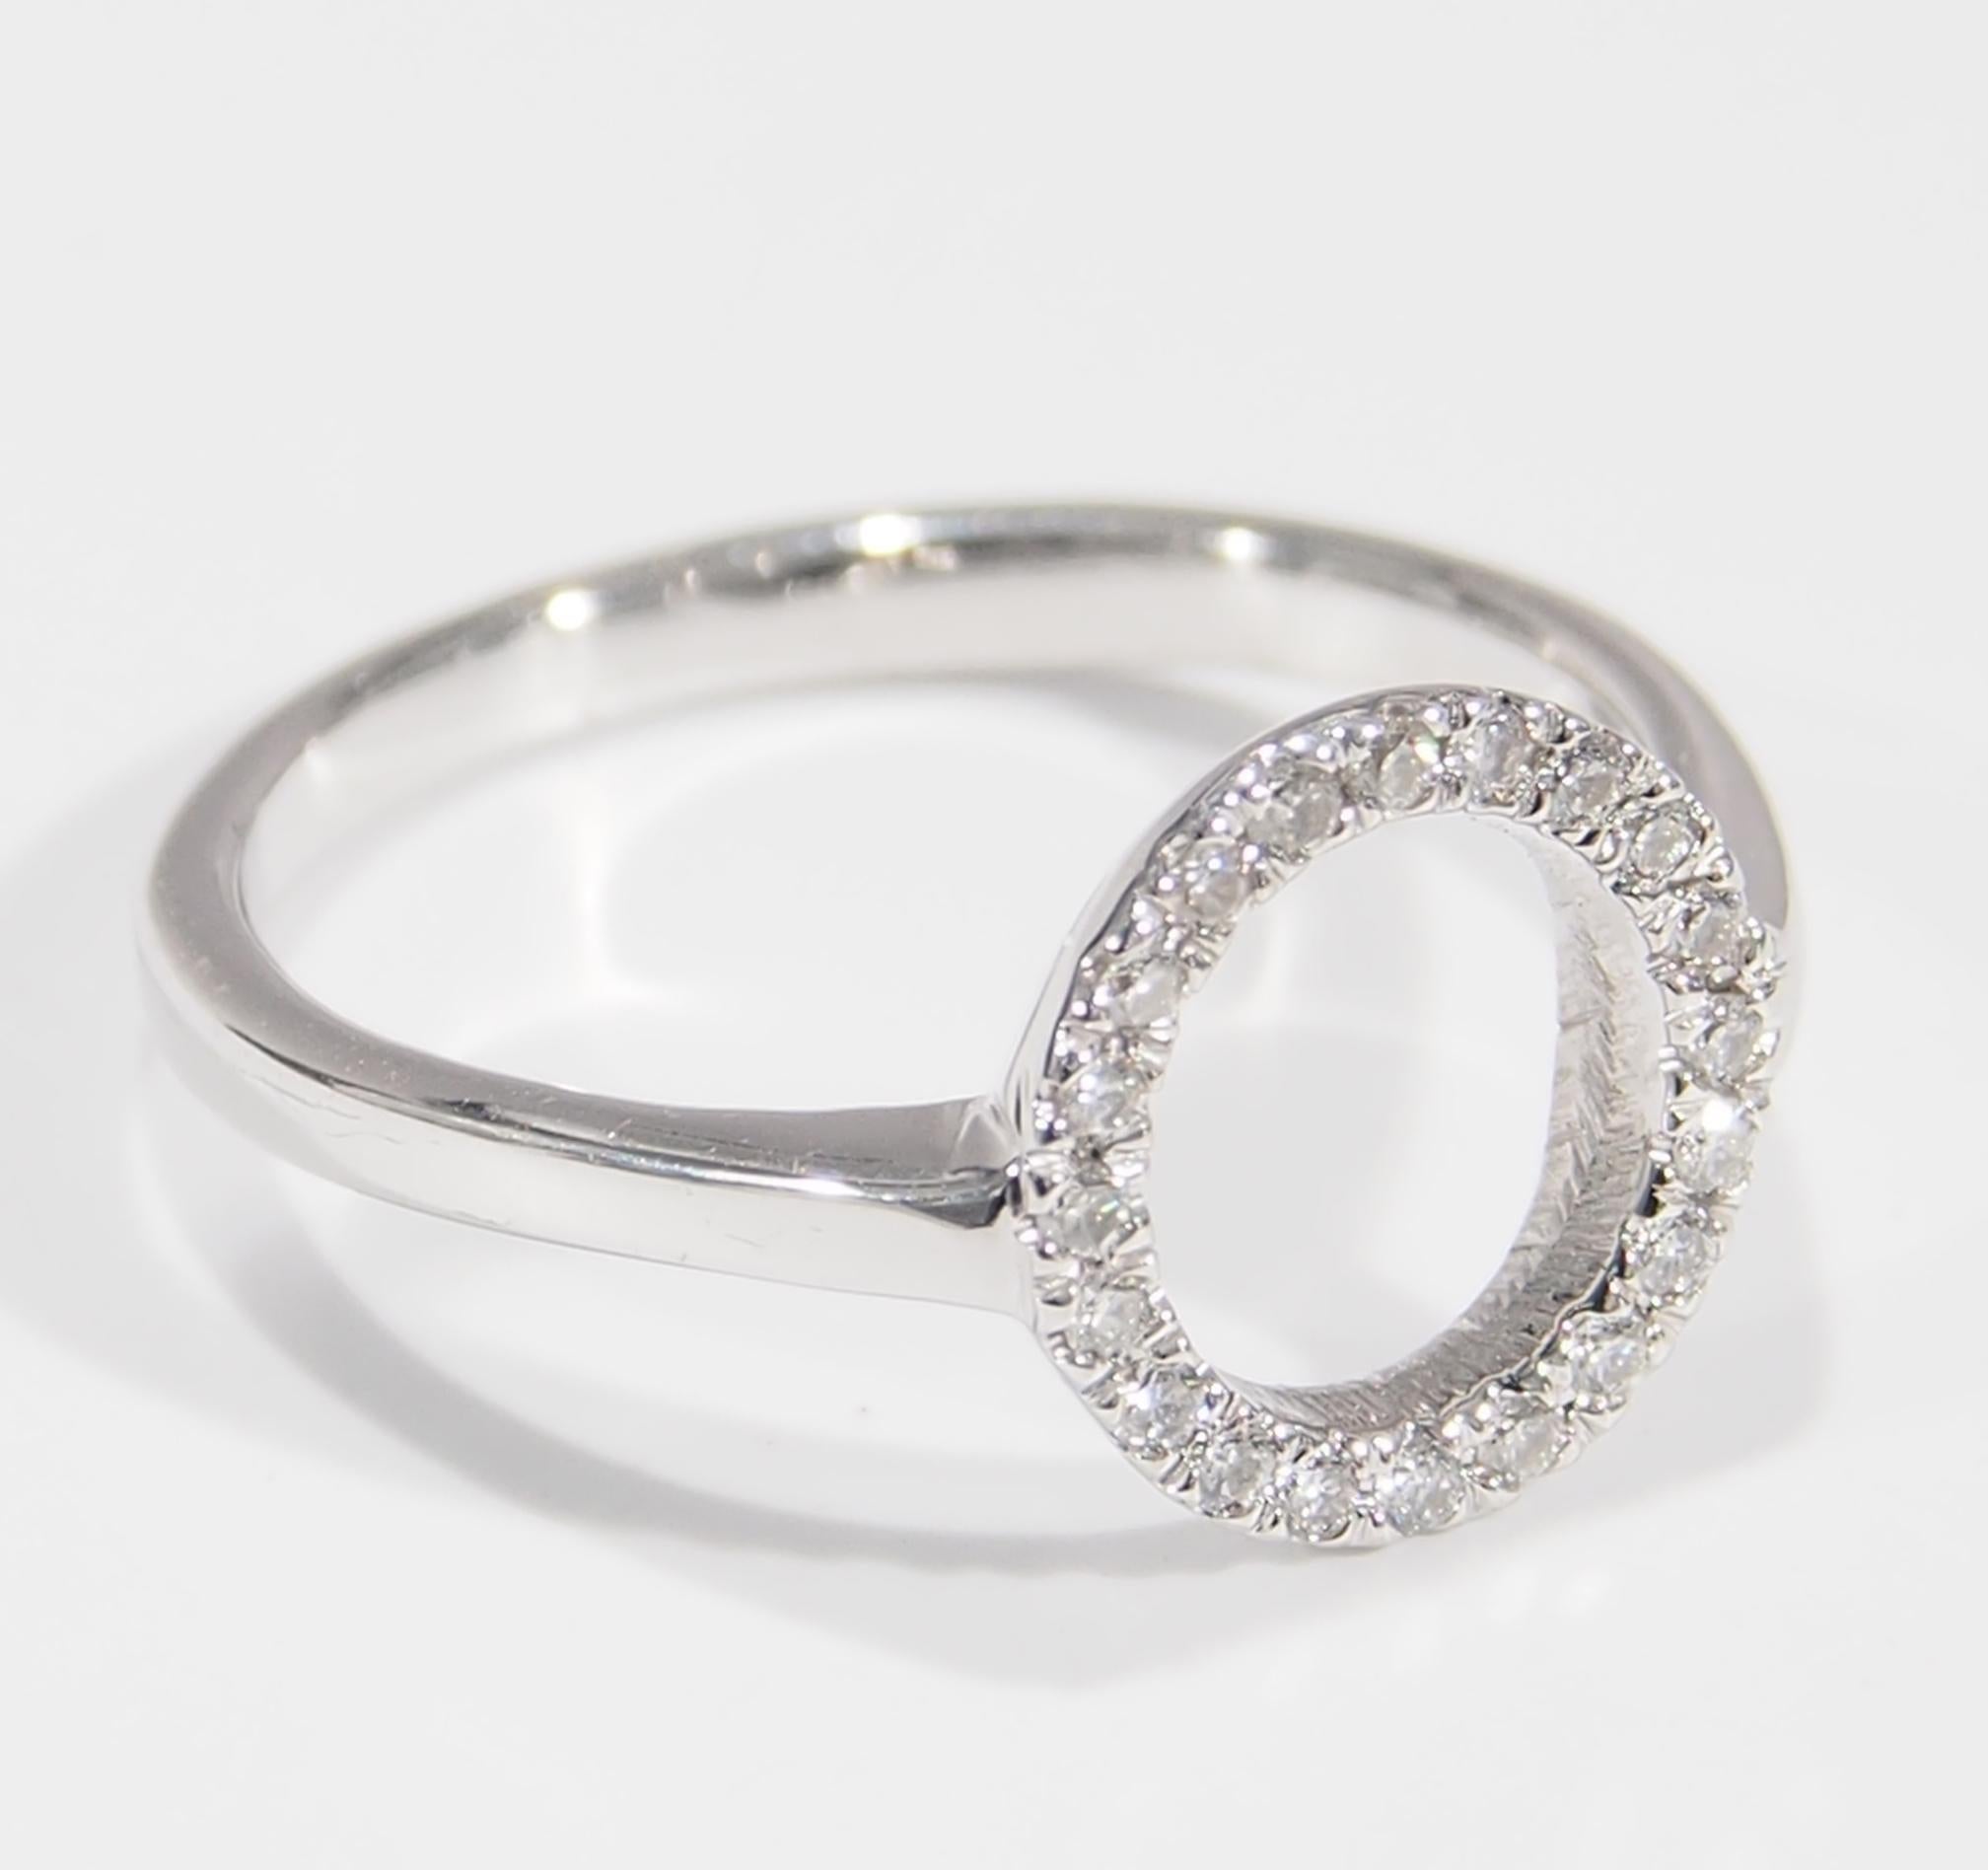 This is a delightful 14K White Gold Ring with (20) Round Brilliant Diamonds, approximately 0.12ctw, G-H in Color, VS-SI in Clarity set in an open circle. A precious style that is easy to wear every day and also can make a great gift. The Ring is a